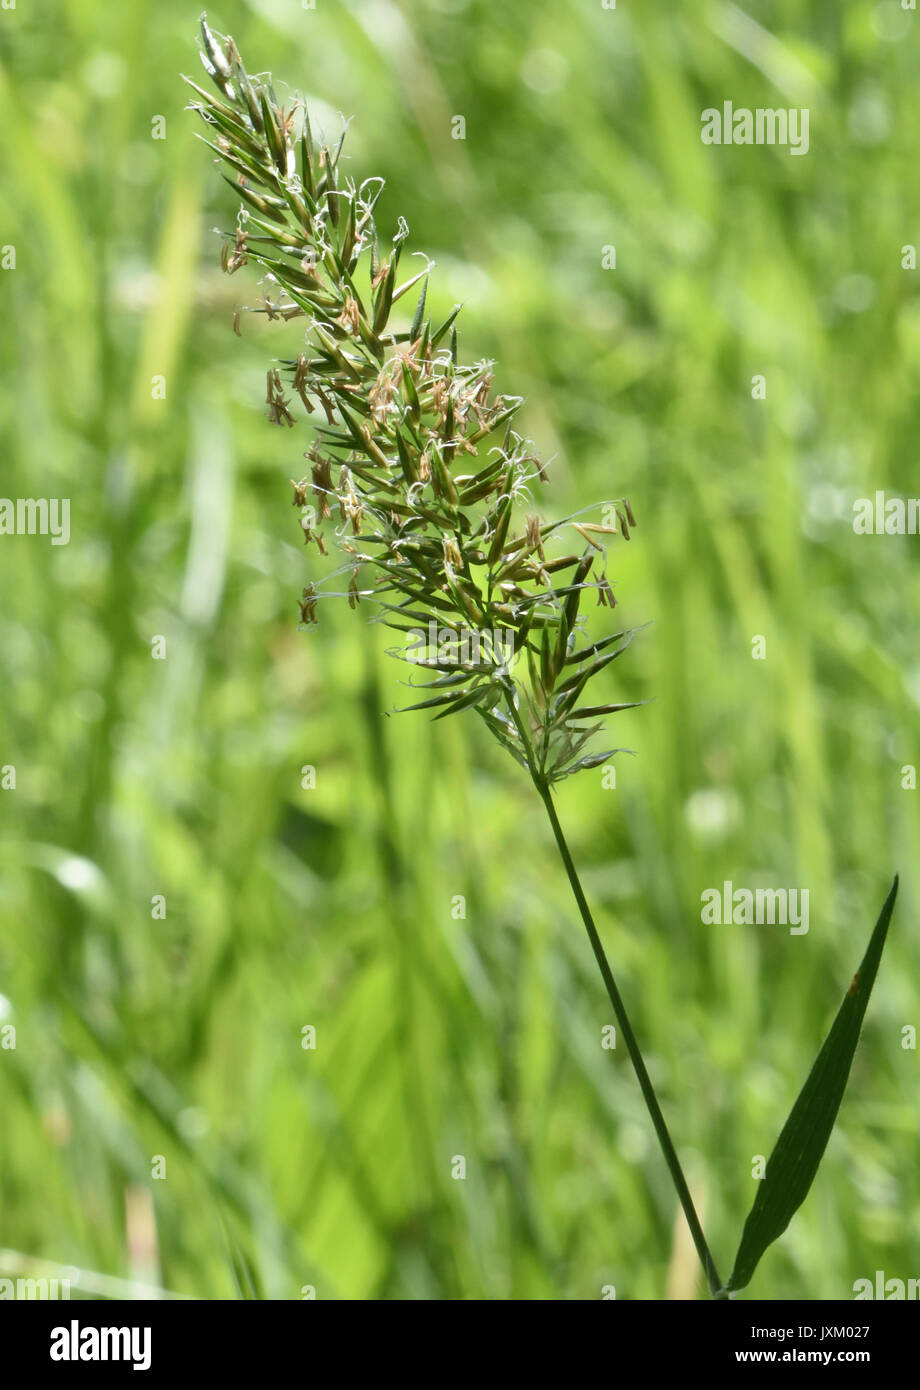 Grass flowering head with the male parts, anther and filament, hanging out in the wind to facilitate pollination. Bedgebury Forest, Kent, UK. Stock Photo